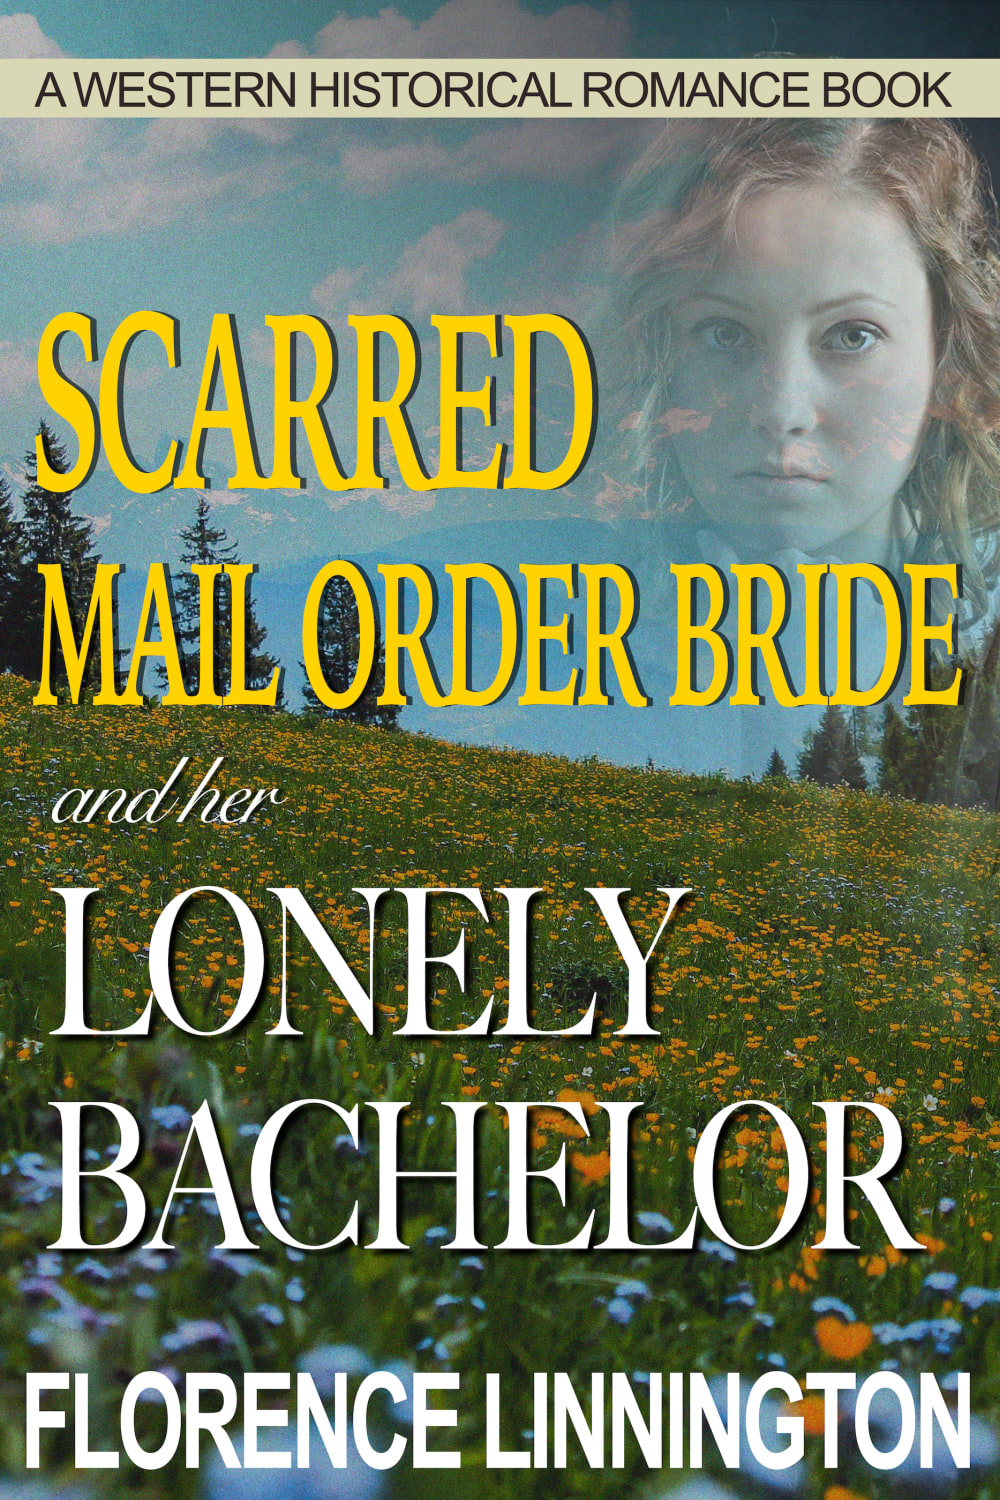 Scarred Mail Order Bride And Her Lonely Bachelor (A Western Historical Romance Book)